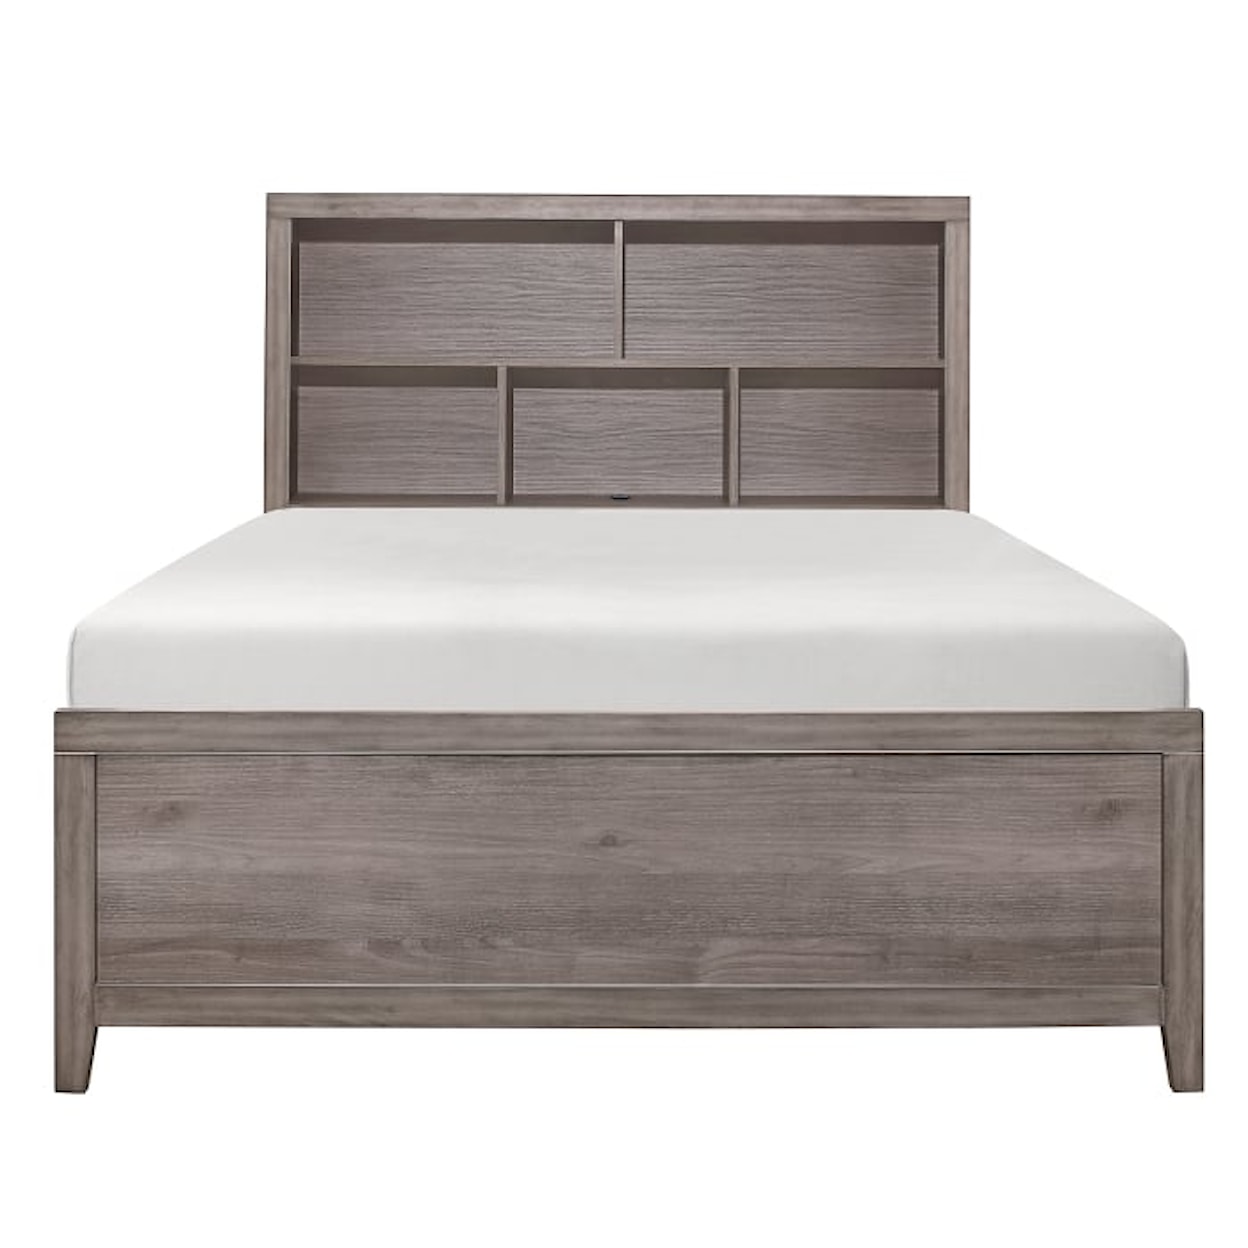 Homelegance Furniture Woodrow 3- Piece Full Wall Bed